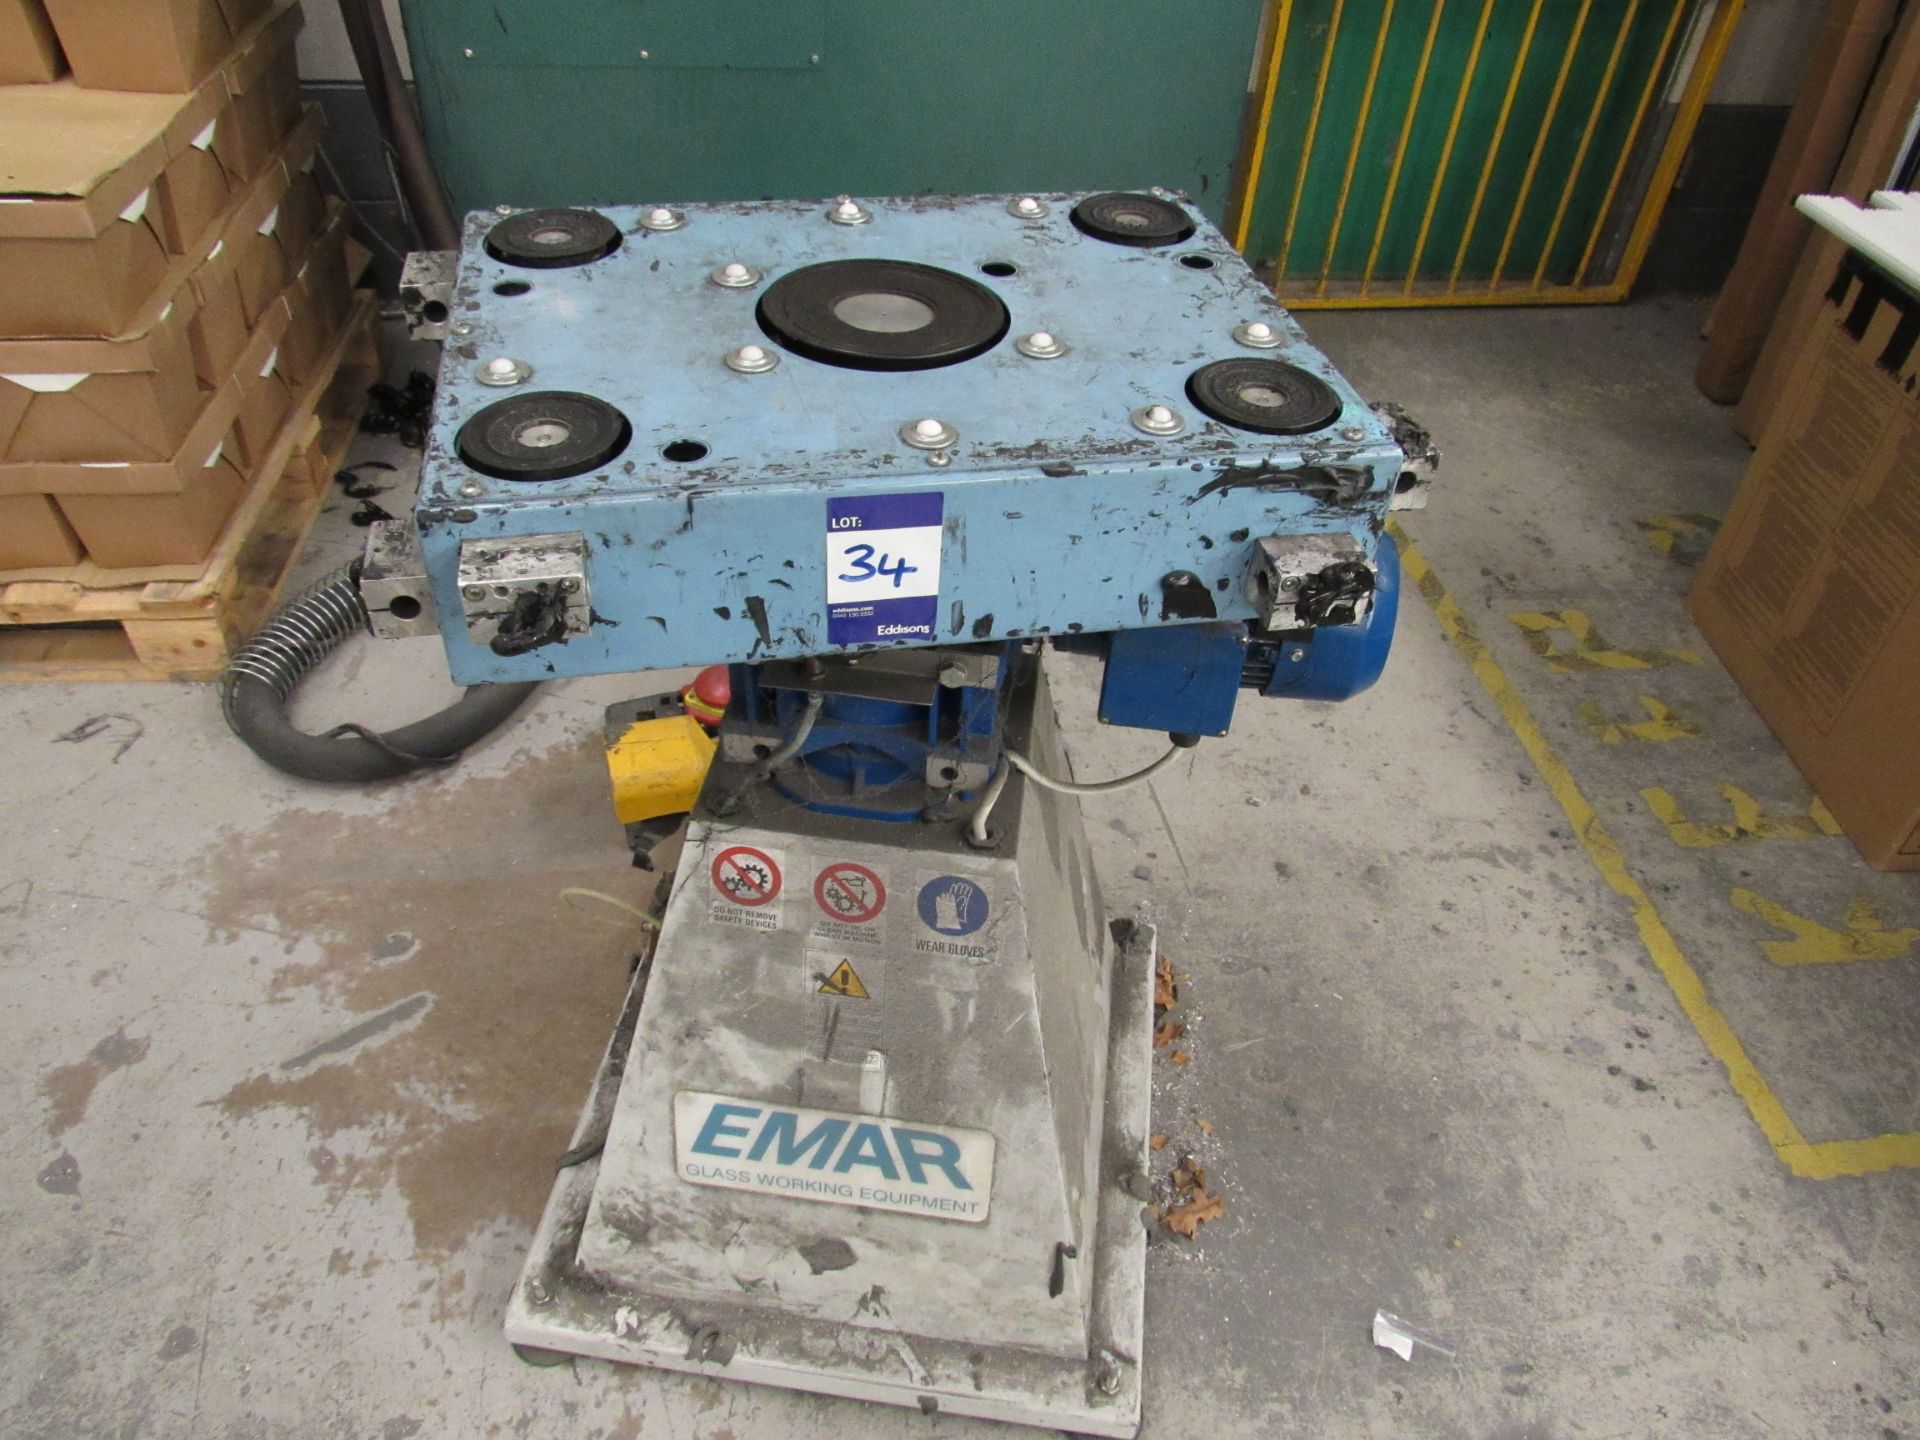 EMAR M116 rotating suction worktable, Serial numbe